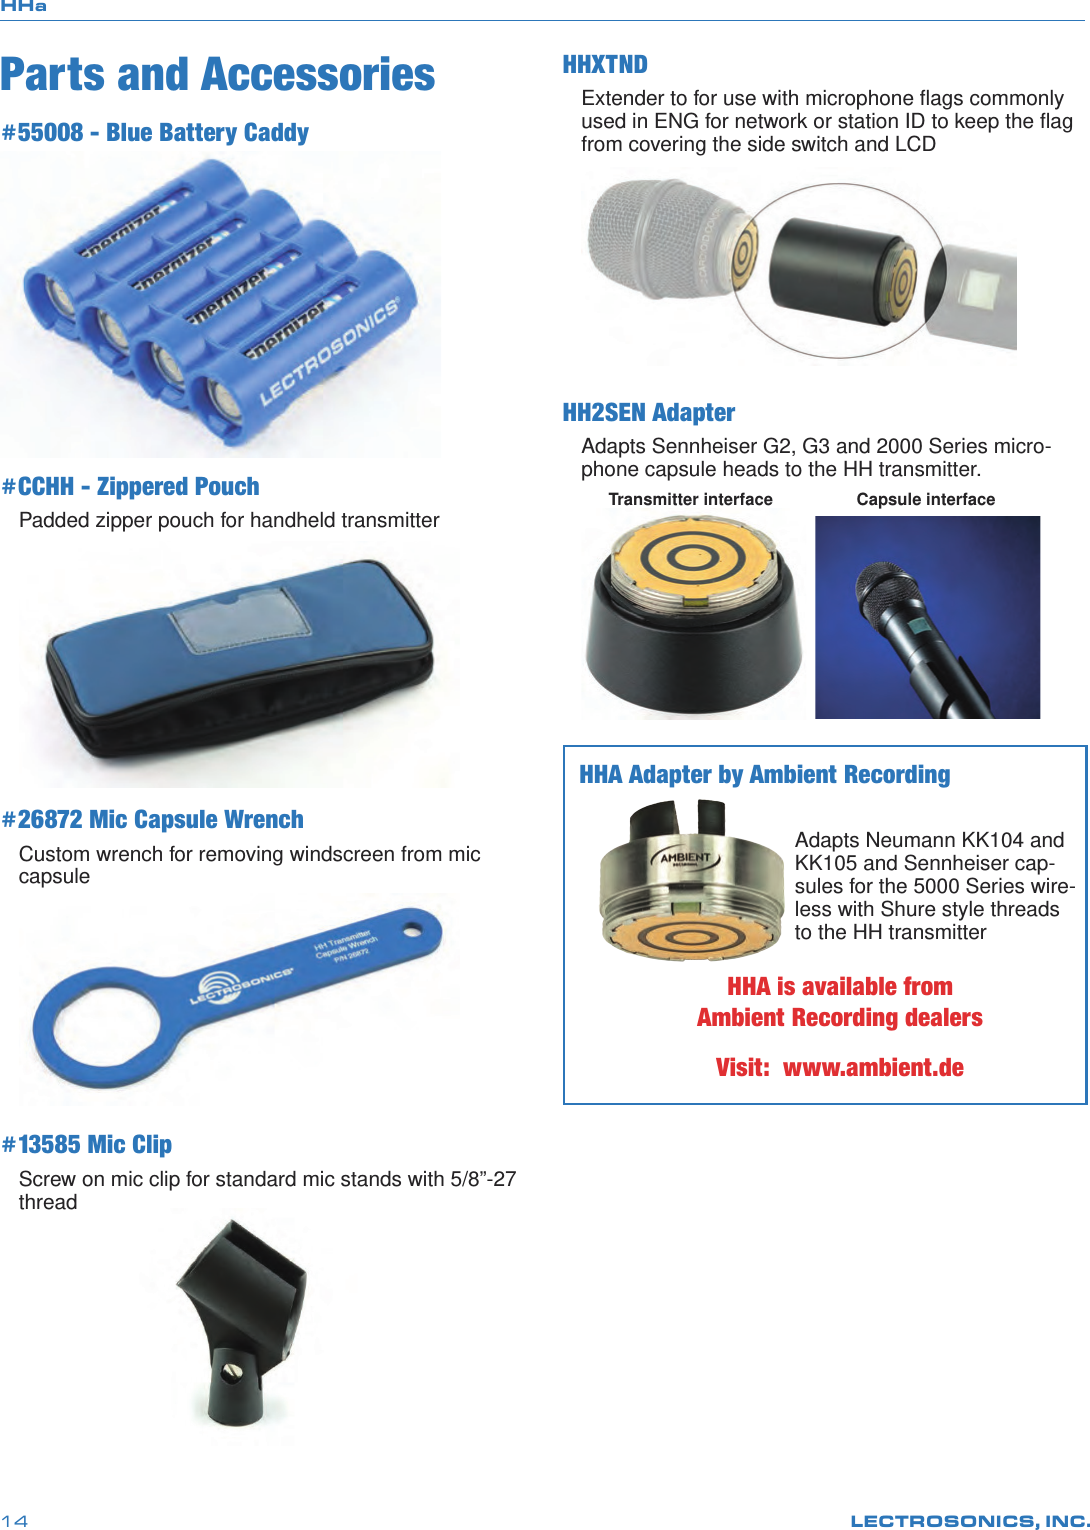 HHaLECTROSONICS, INC.14Parts and Accessories#55008 - Blue Battery Caddy #CCHH - Zippered PouchPadded zipper pouch for handheld transmitter#26872 Mic Capsule WrenchCustom wrench for removing windscreen from mic capsule#13585 Mic ClipScrew on mic clip for standard mic stands with 5/8”-27 thread HHXTNDExtender to for use with microphone ﬂags commonly used in ENG for network or station ID to keep the ﬂag from covering the side switch and LCDHH2SEN AdapterAdapts Sennheiser G2, G3 and 2000 Series micro-phone capsule heads to the HH transmitter.Transmitter interface Capsule interfaceHHA Adapter by Ambient RecordingAdapts Neumann KK104 and KK105 and Sennheiser cap-sules for the 5000 Series wire-less with Shure style threads to the HH transmitterHHA is available from Ambient Recording dealersVisit:  www.ambient.de